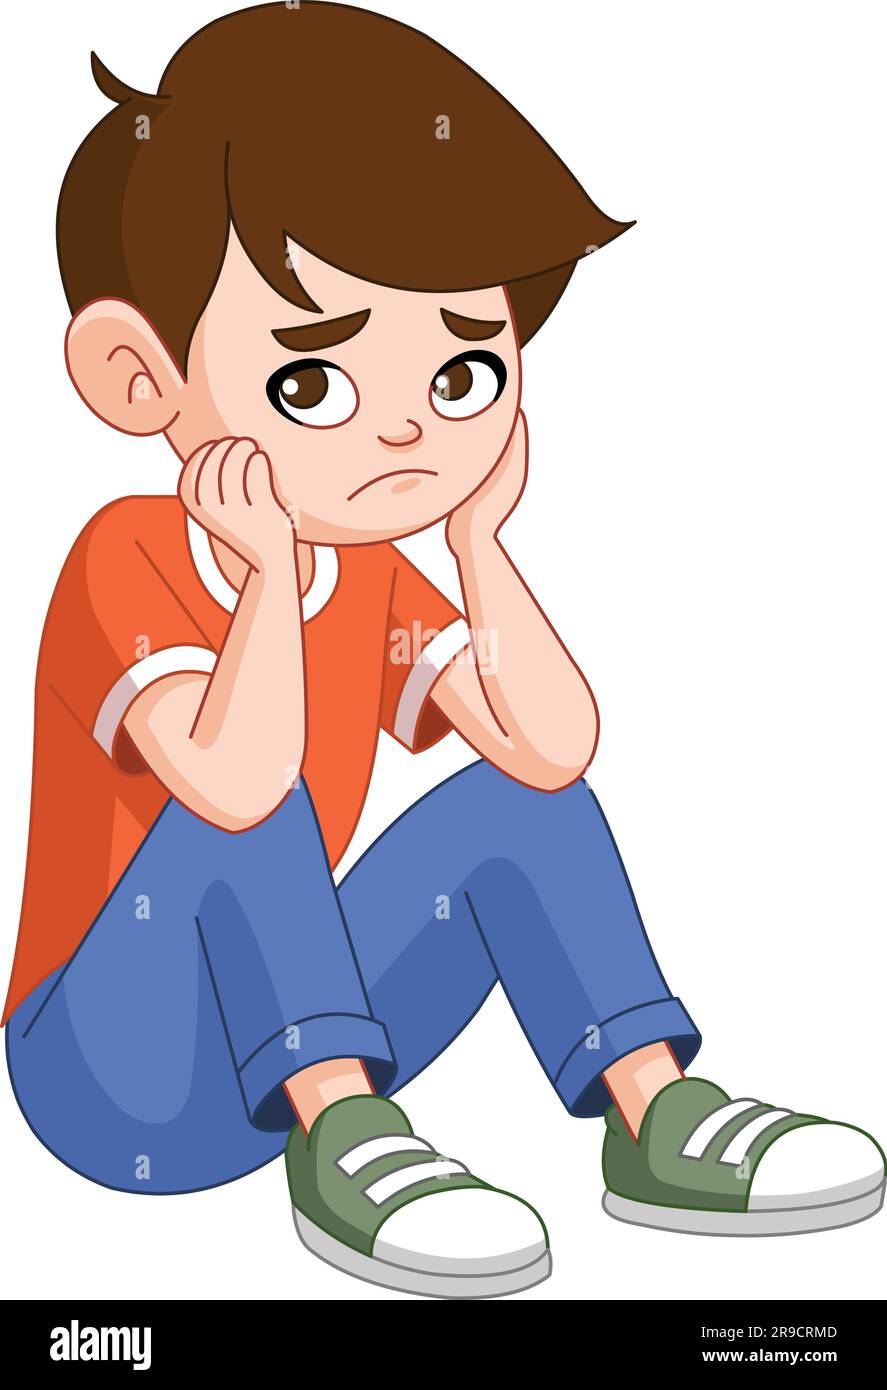 A boy with a sad or pensive expression sits on the floor Stock Vector